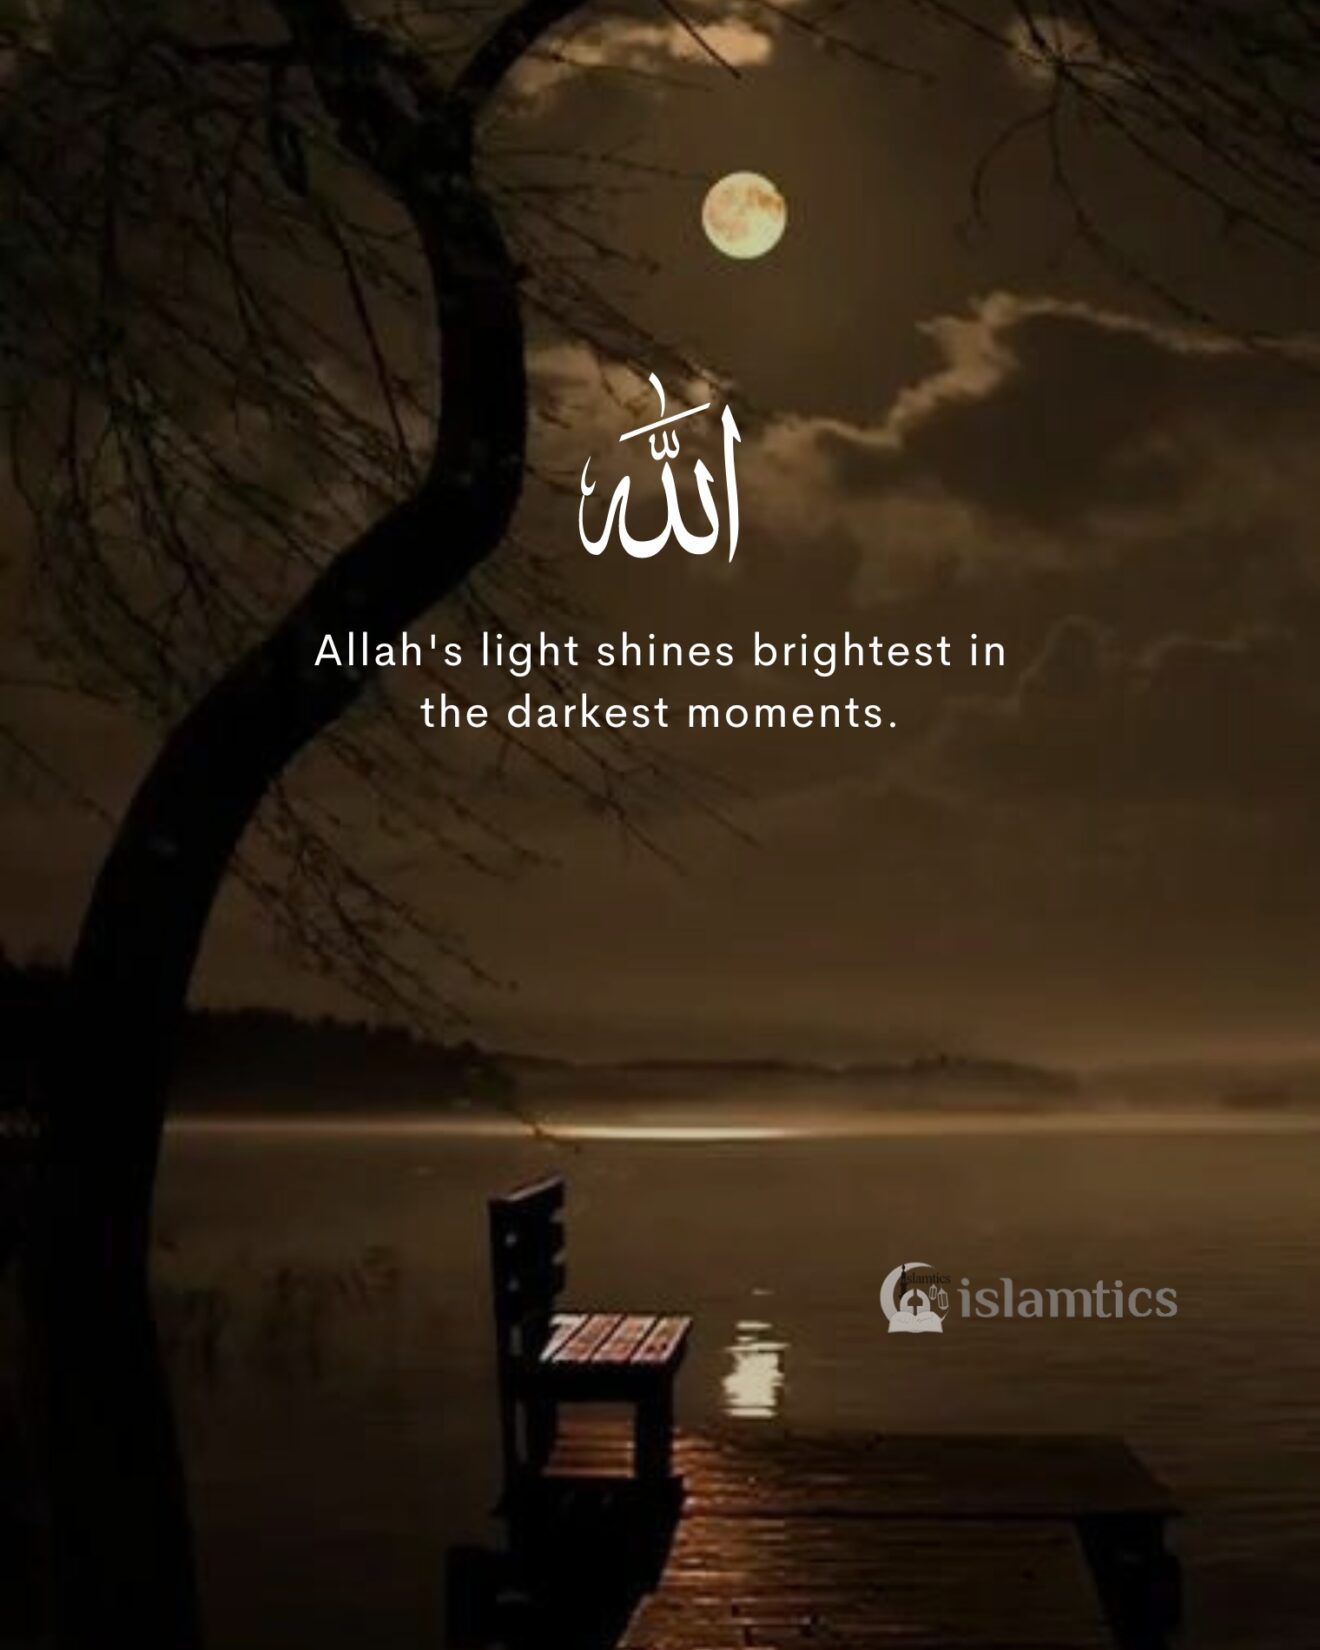 Allah’s light shines brightest in the darkest moments.